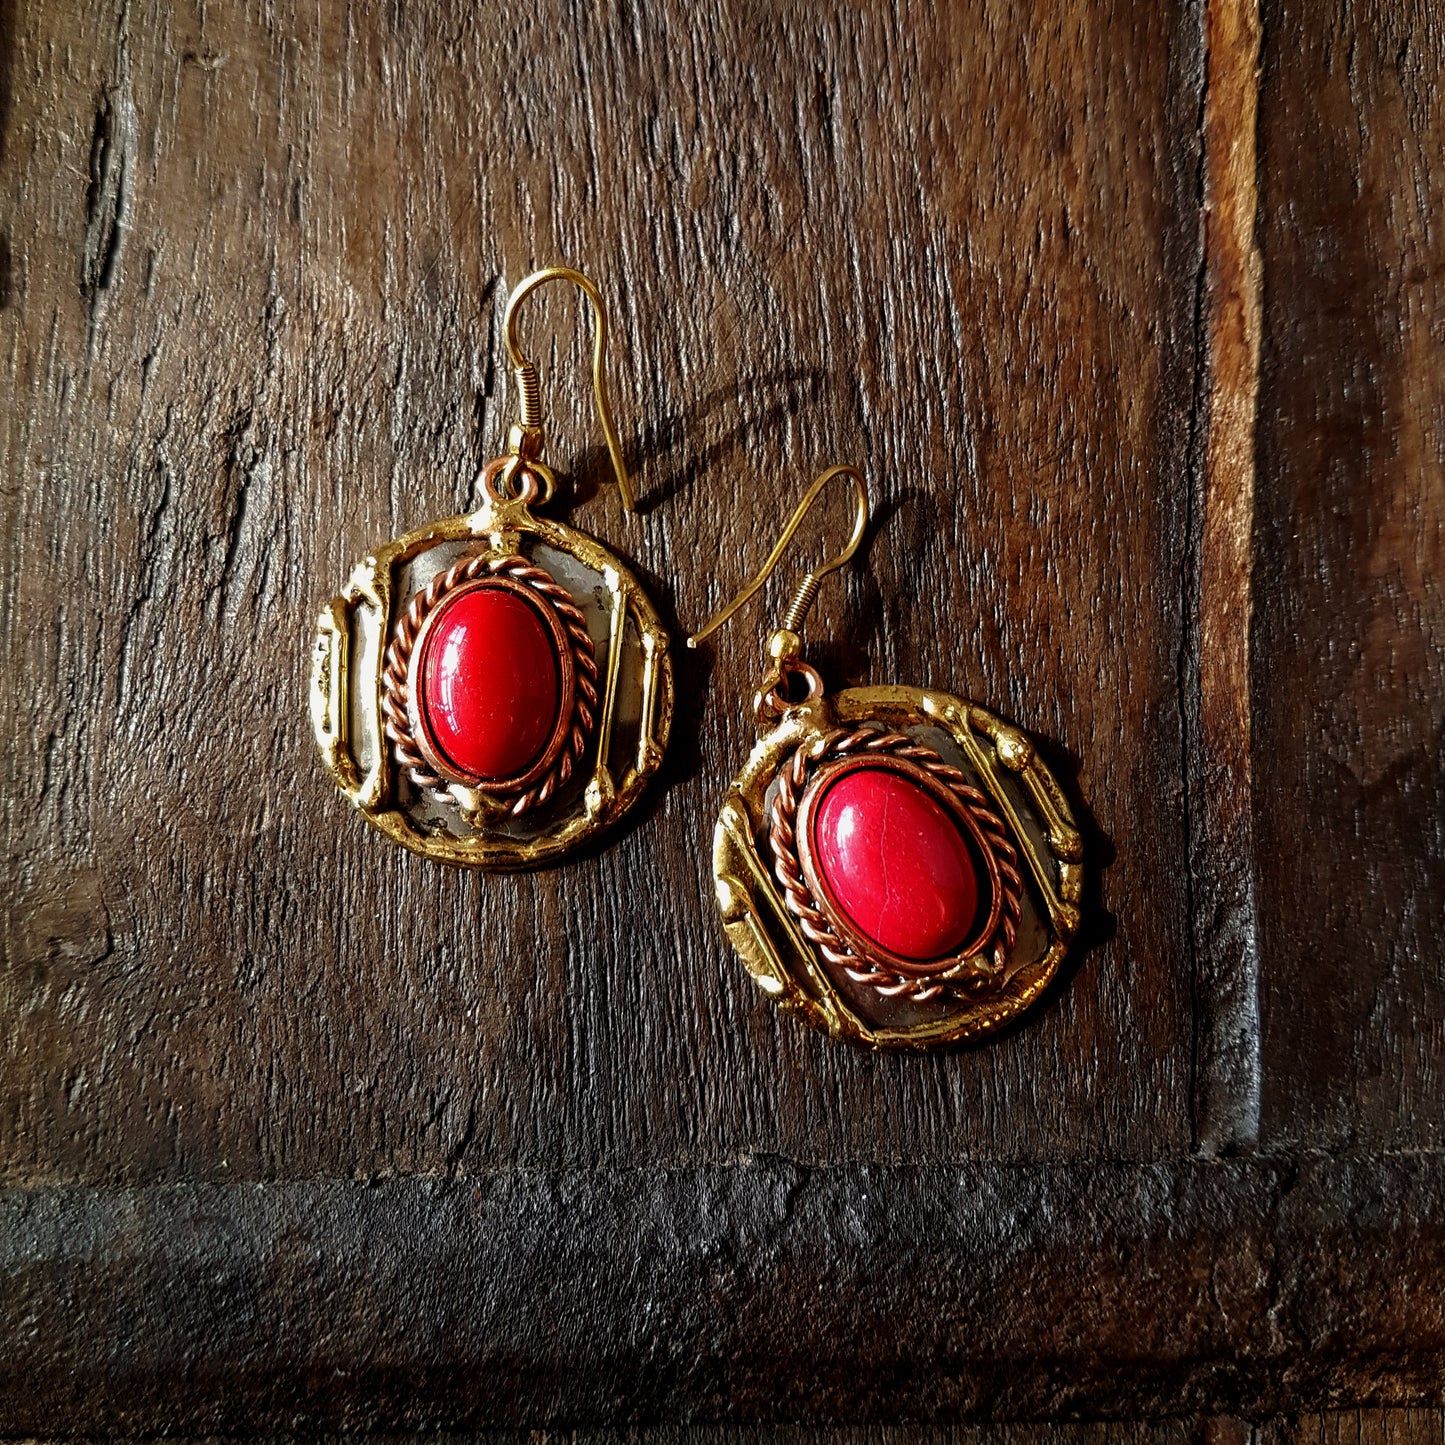 Red agate earrings in a hammered silver & mixed metal design. Stunning and unique!